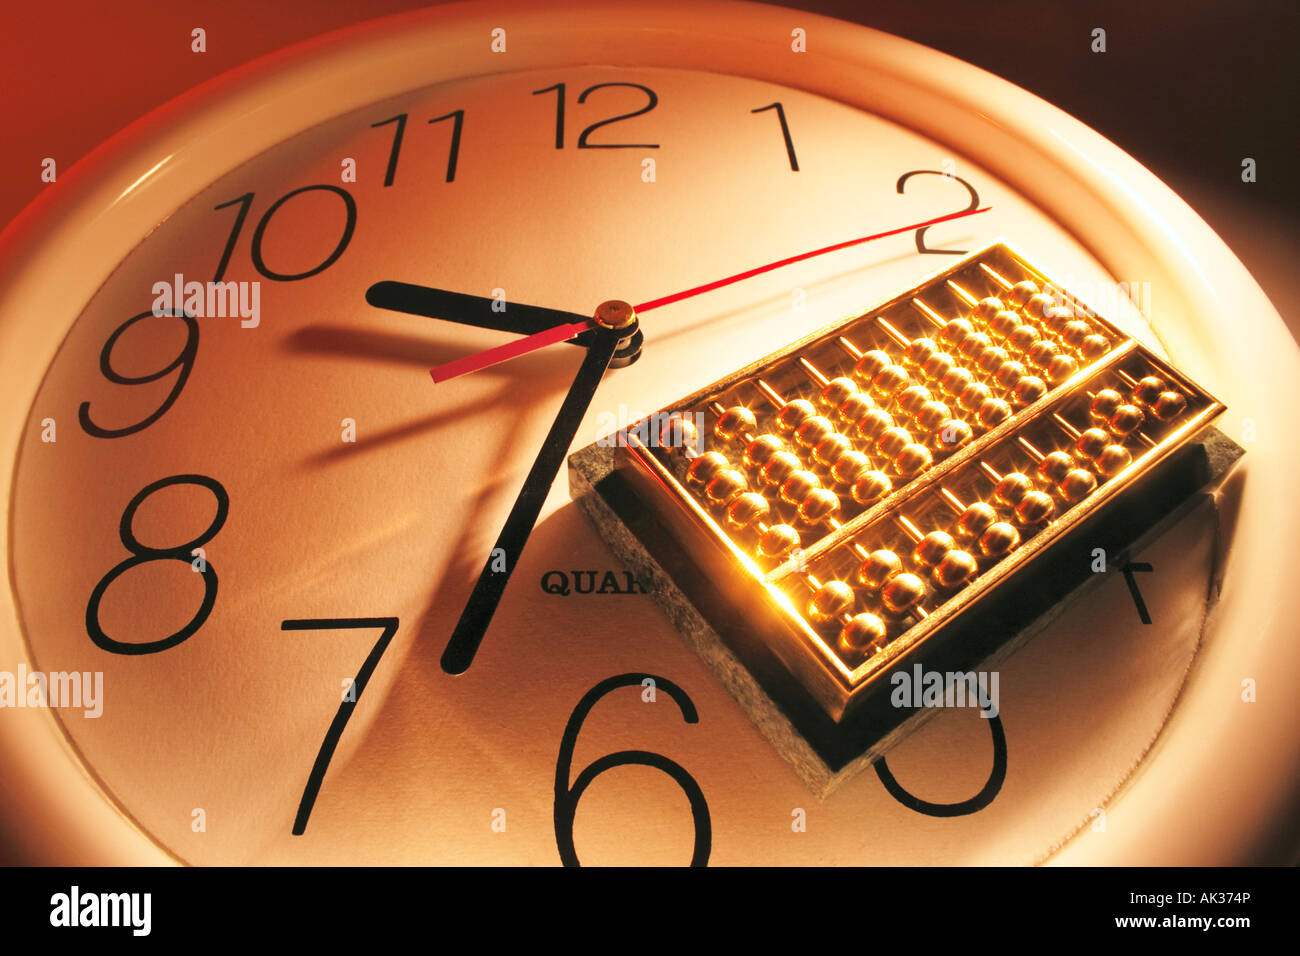 Abacus on Clock Stock Photo